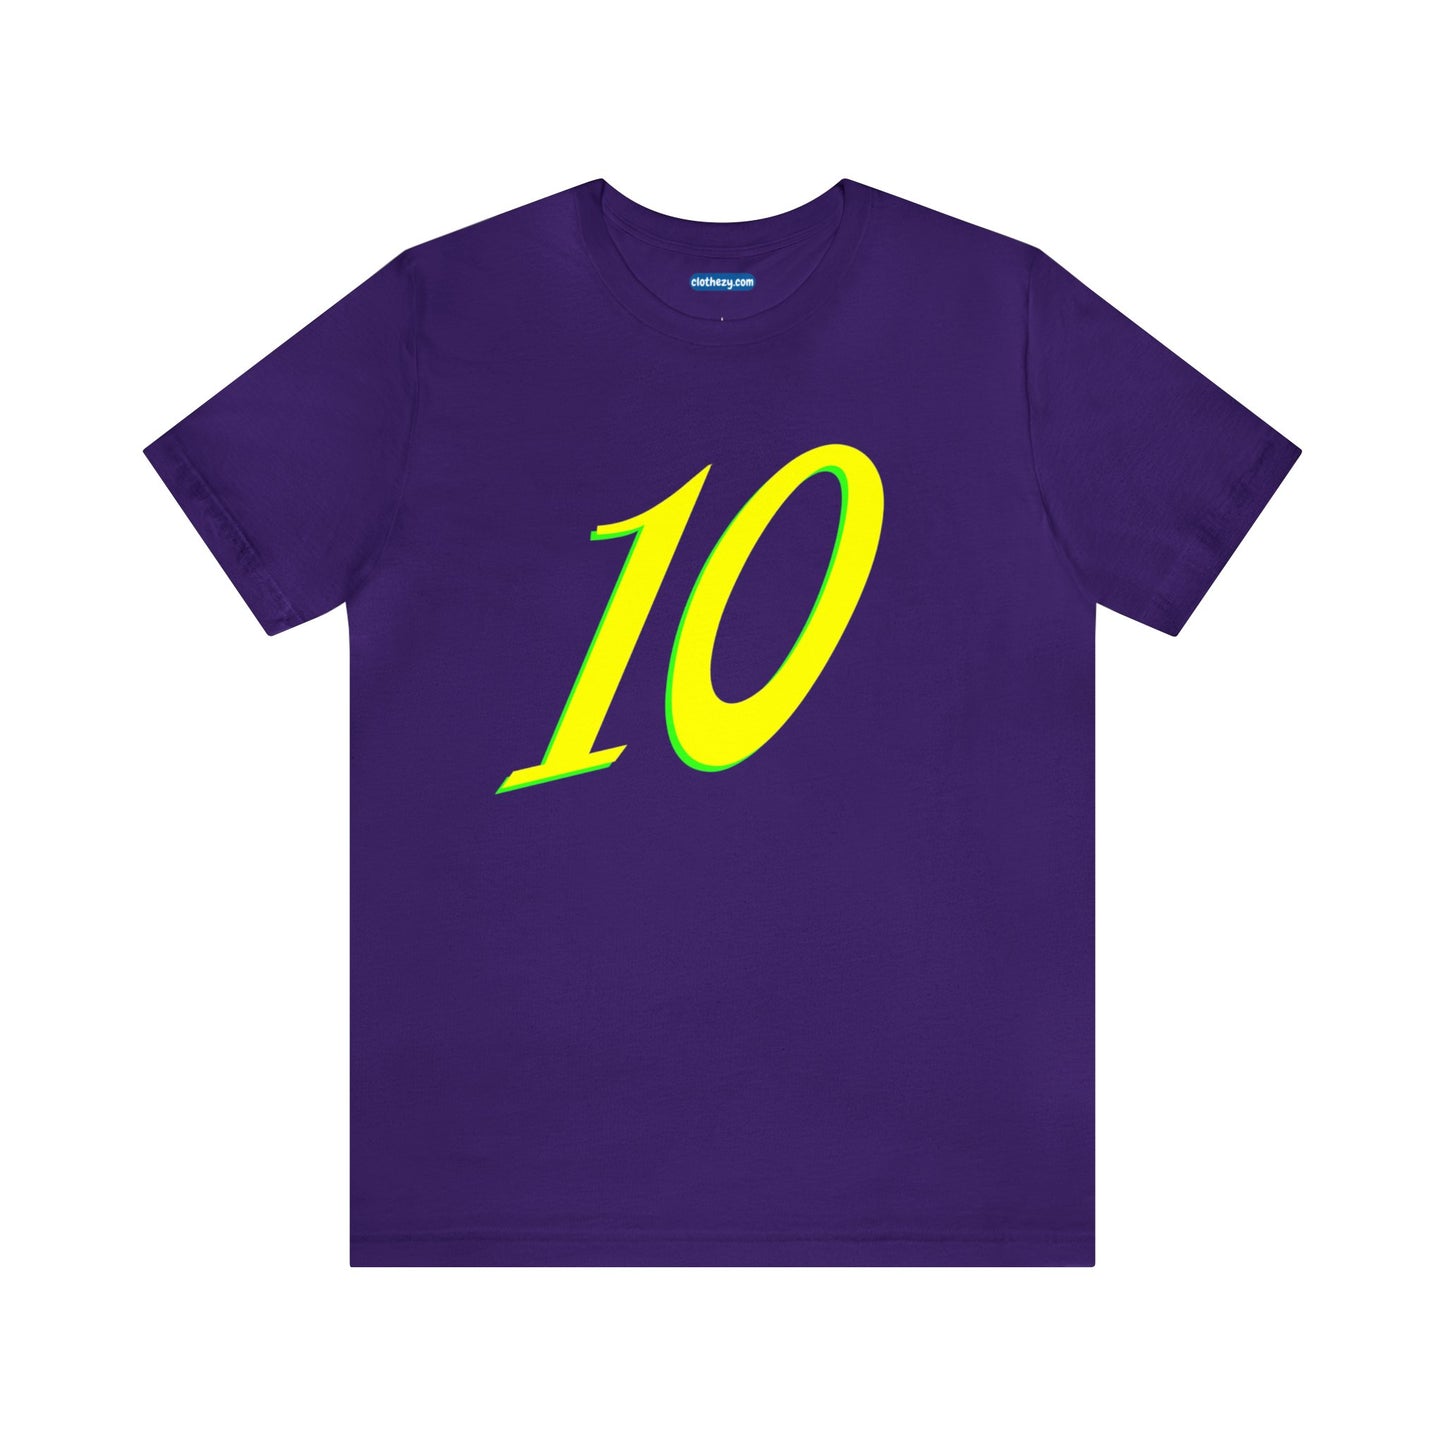 Number 10 Design - Soft Cotton Tee for birthdays and celebrations, Gift for friends and family, Multiple Options by clothezy.com in Purple Size Small - Buy Now